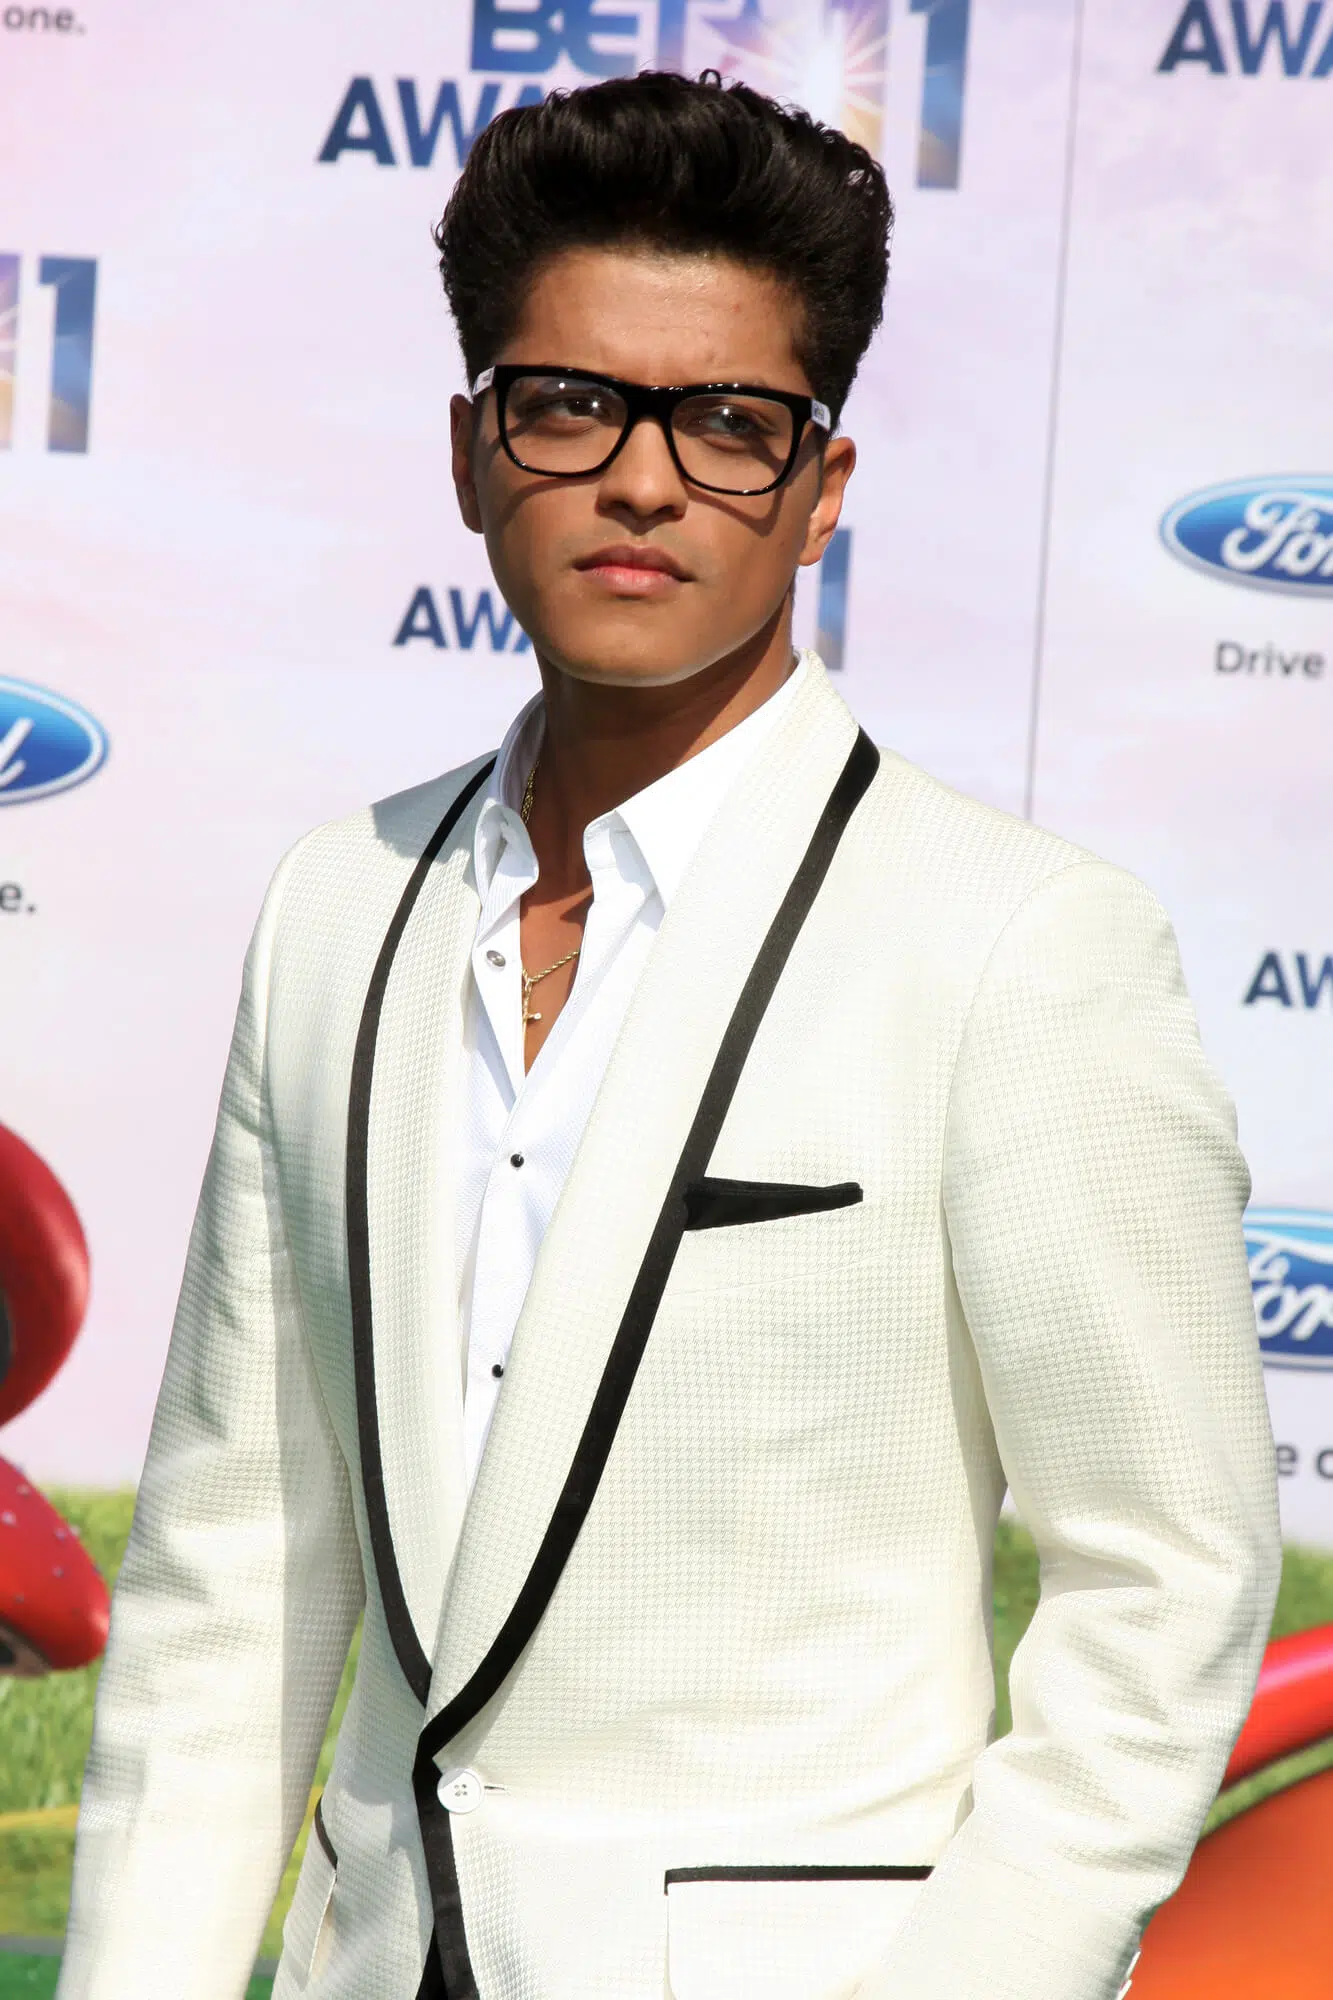 Bruno Mars Personal Style